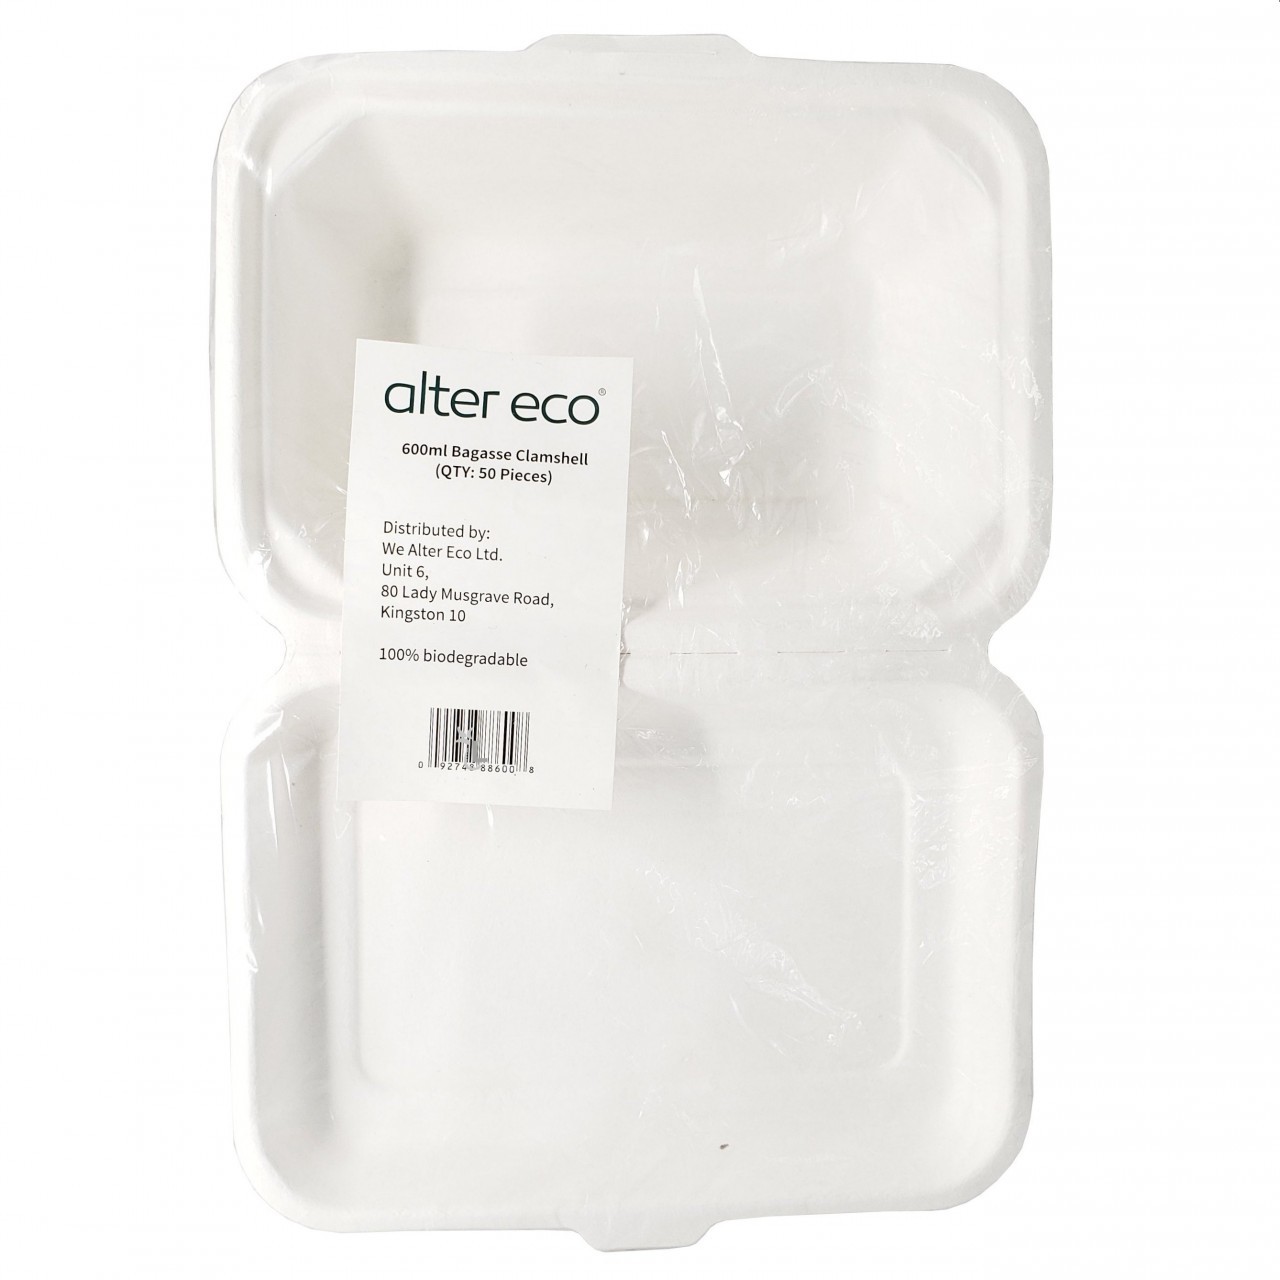 ALTER ECO BAGASSE CLAMSHELL 50x600ml